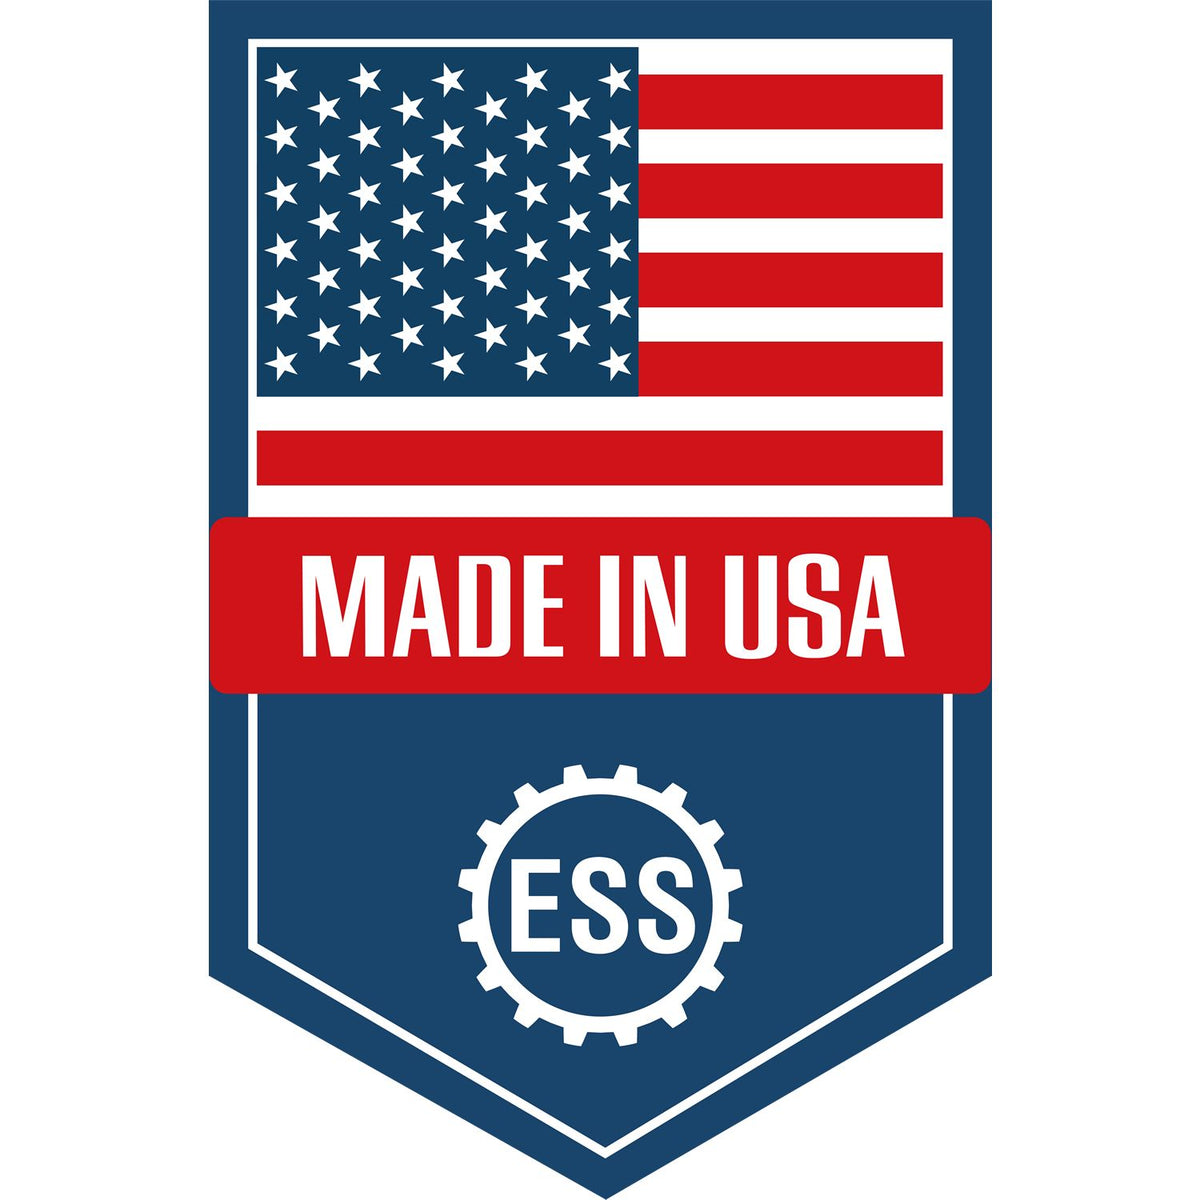 An icon or graphic with an american flag and text reading Made in USA for the Soft Louisiana Professional Geologist Seal